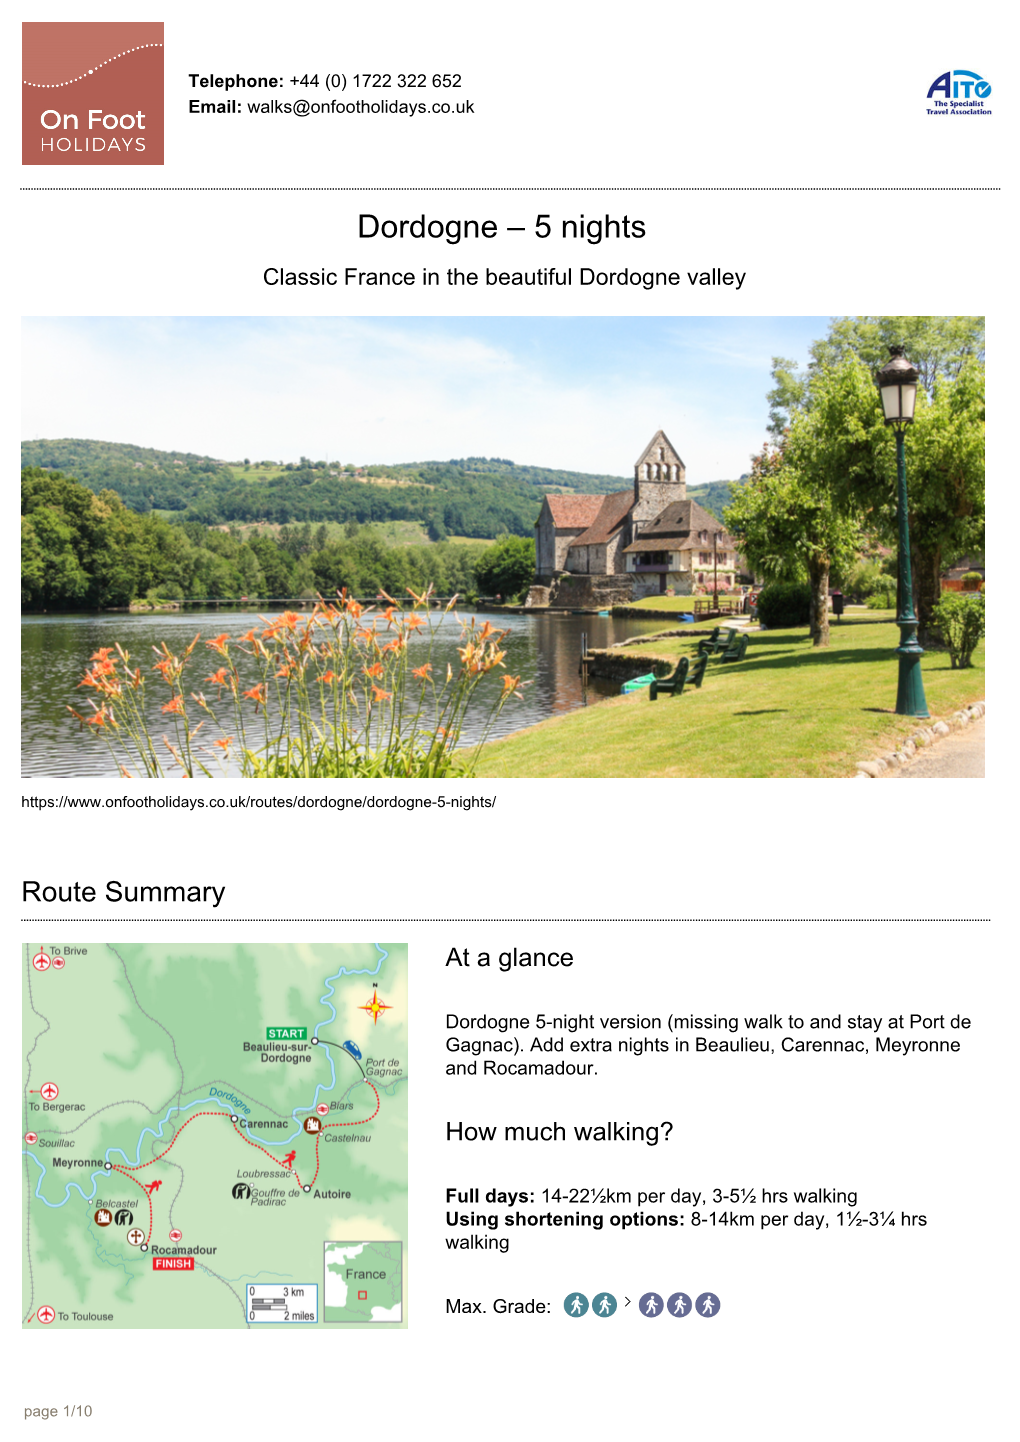 Dordogne – 5 Nights Classic France in the Beautiful Dordogne Valley